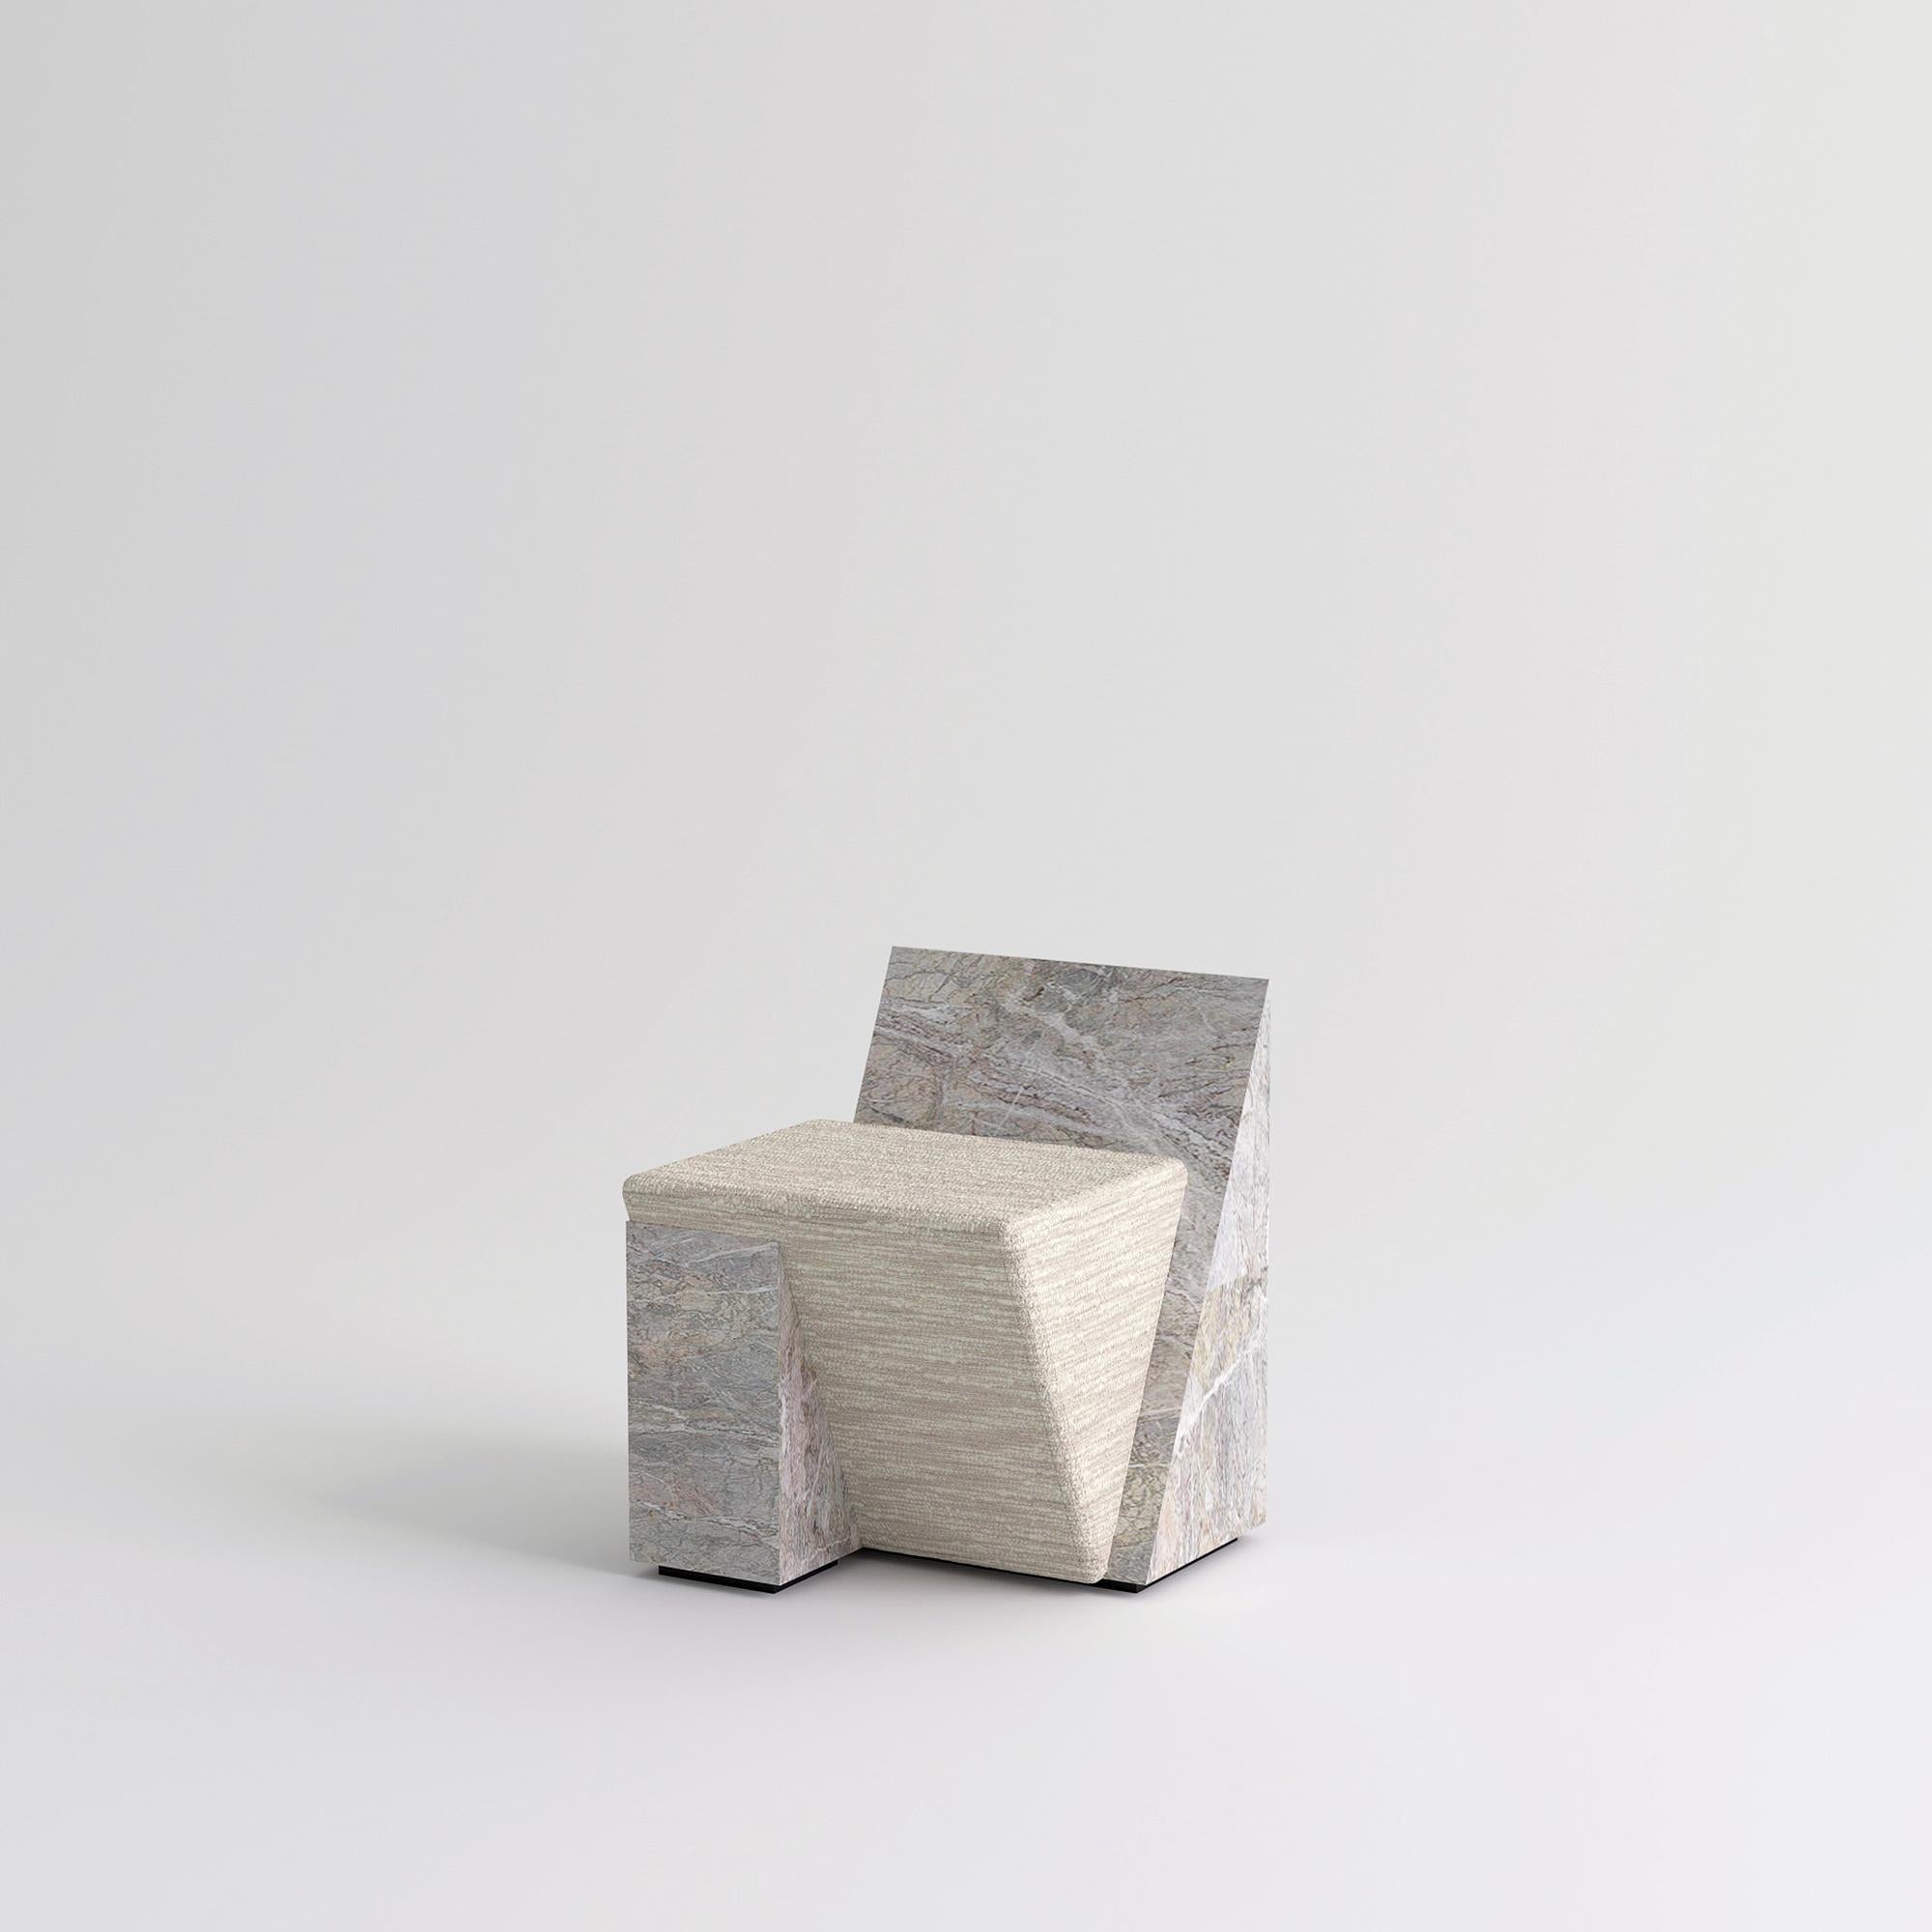 Marmini II chair, Hannes Peer
Dimensions: 55 W x 50.4 D x 64 H cm
Materials: Fior di Pesco marble, Lelièvre Helsinki fabric

Marmini II is despite its minimalistic architectural appearance a comfortable upholstered stool. It is composed of three